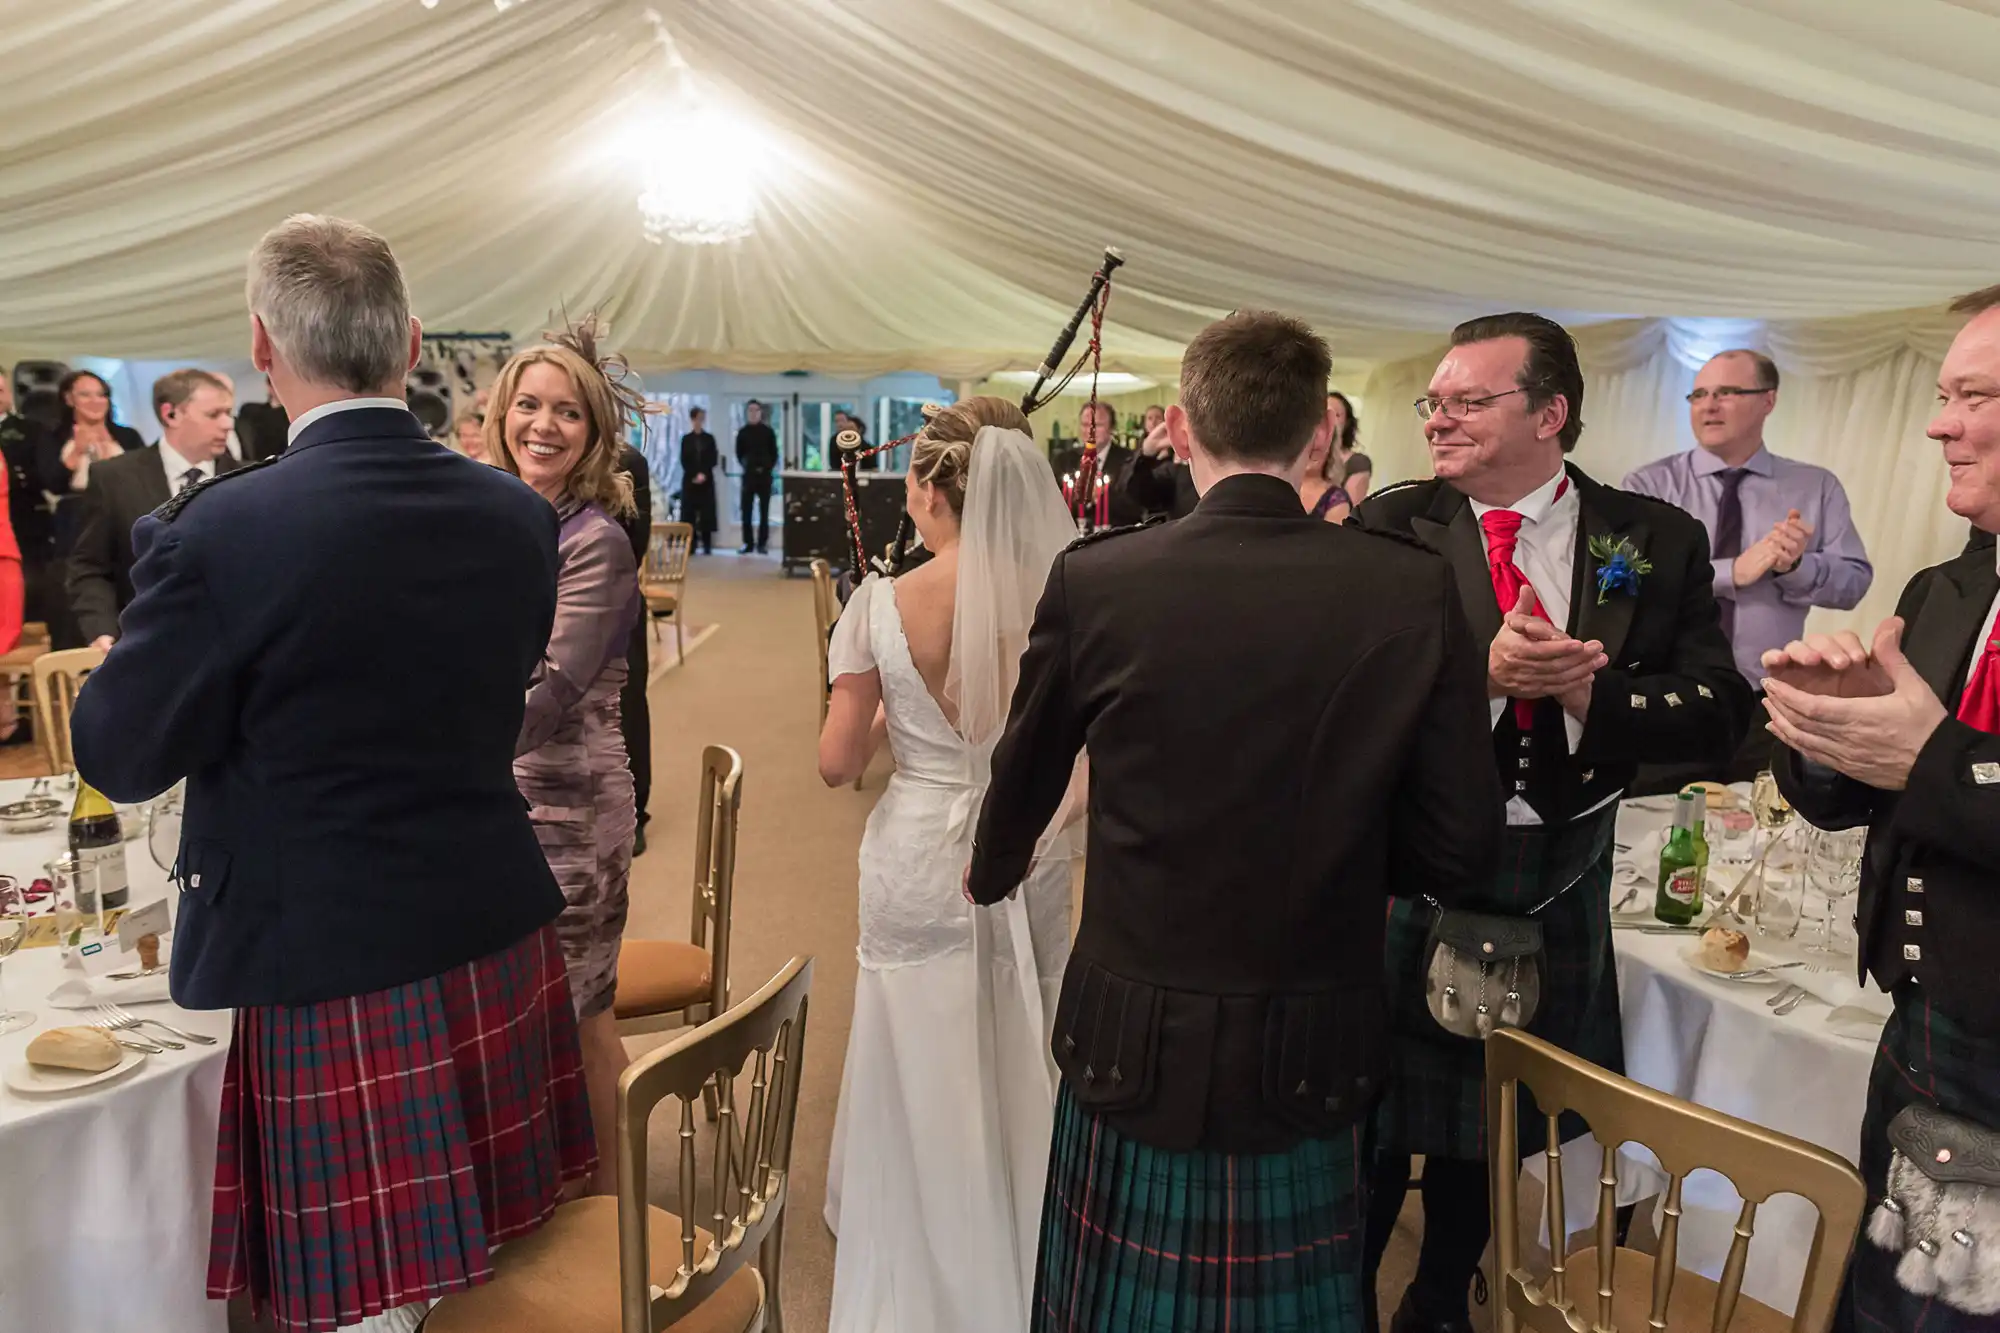 Guests in kilts applauding a bride and groom at a wedding reception inside a tent.